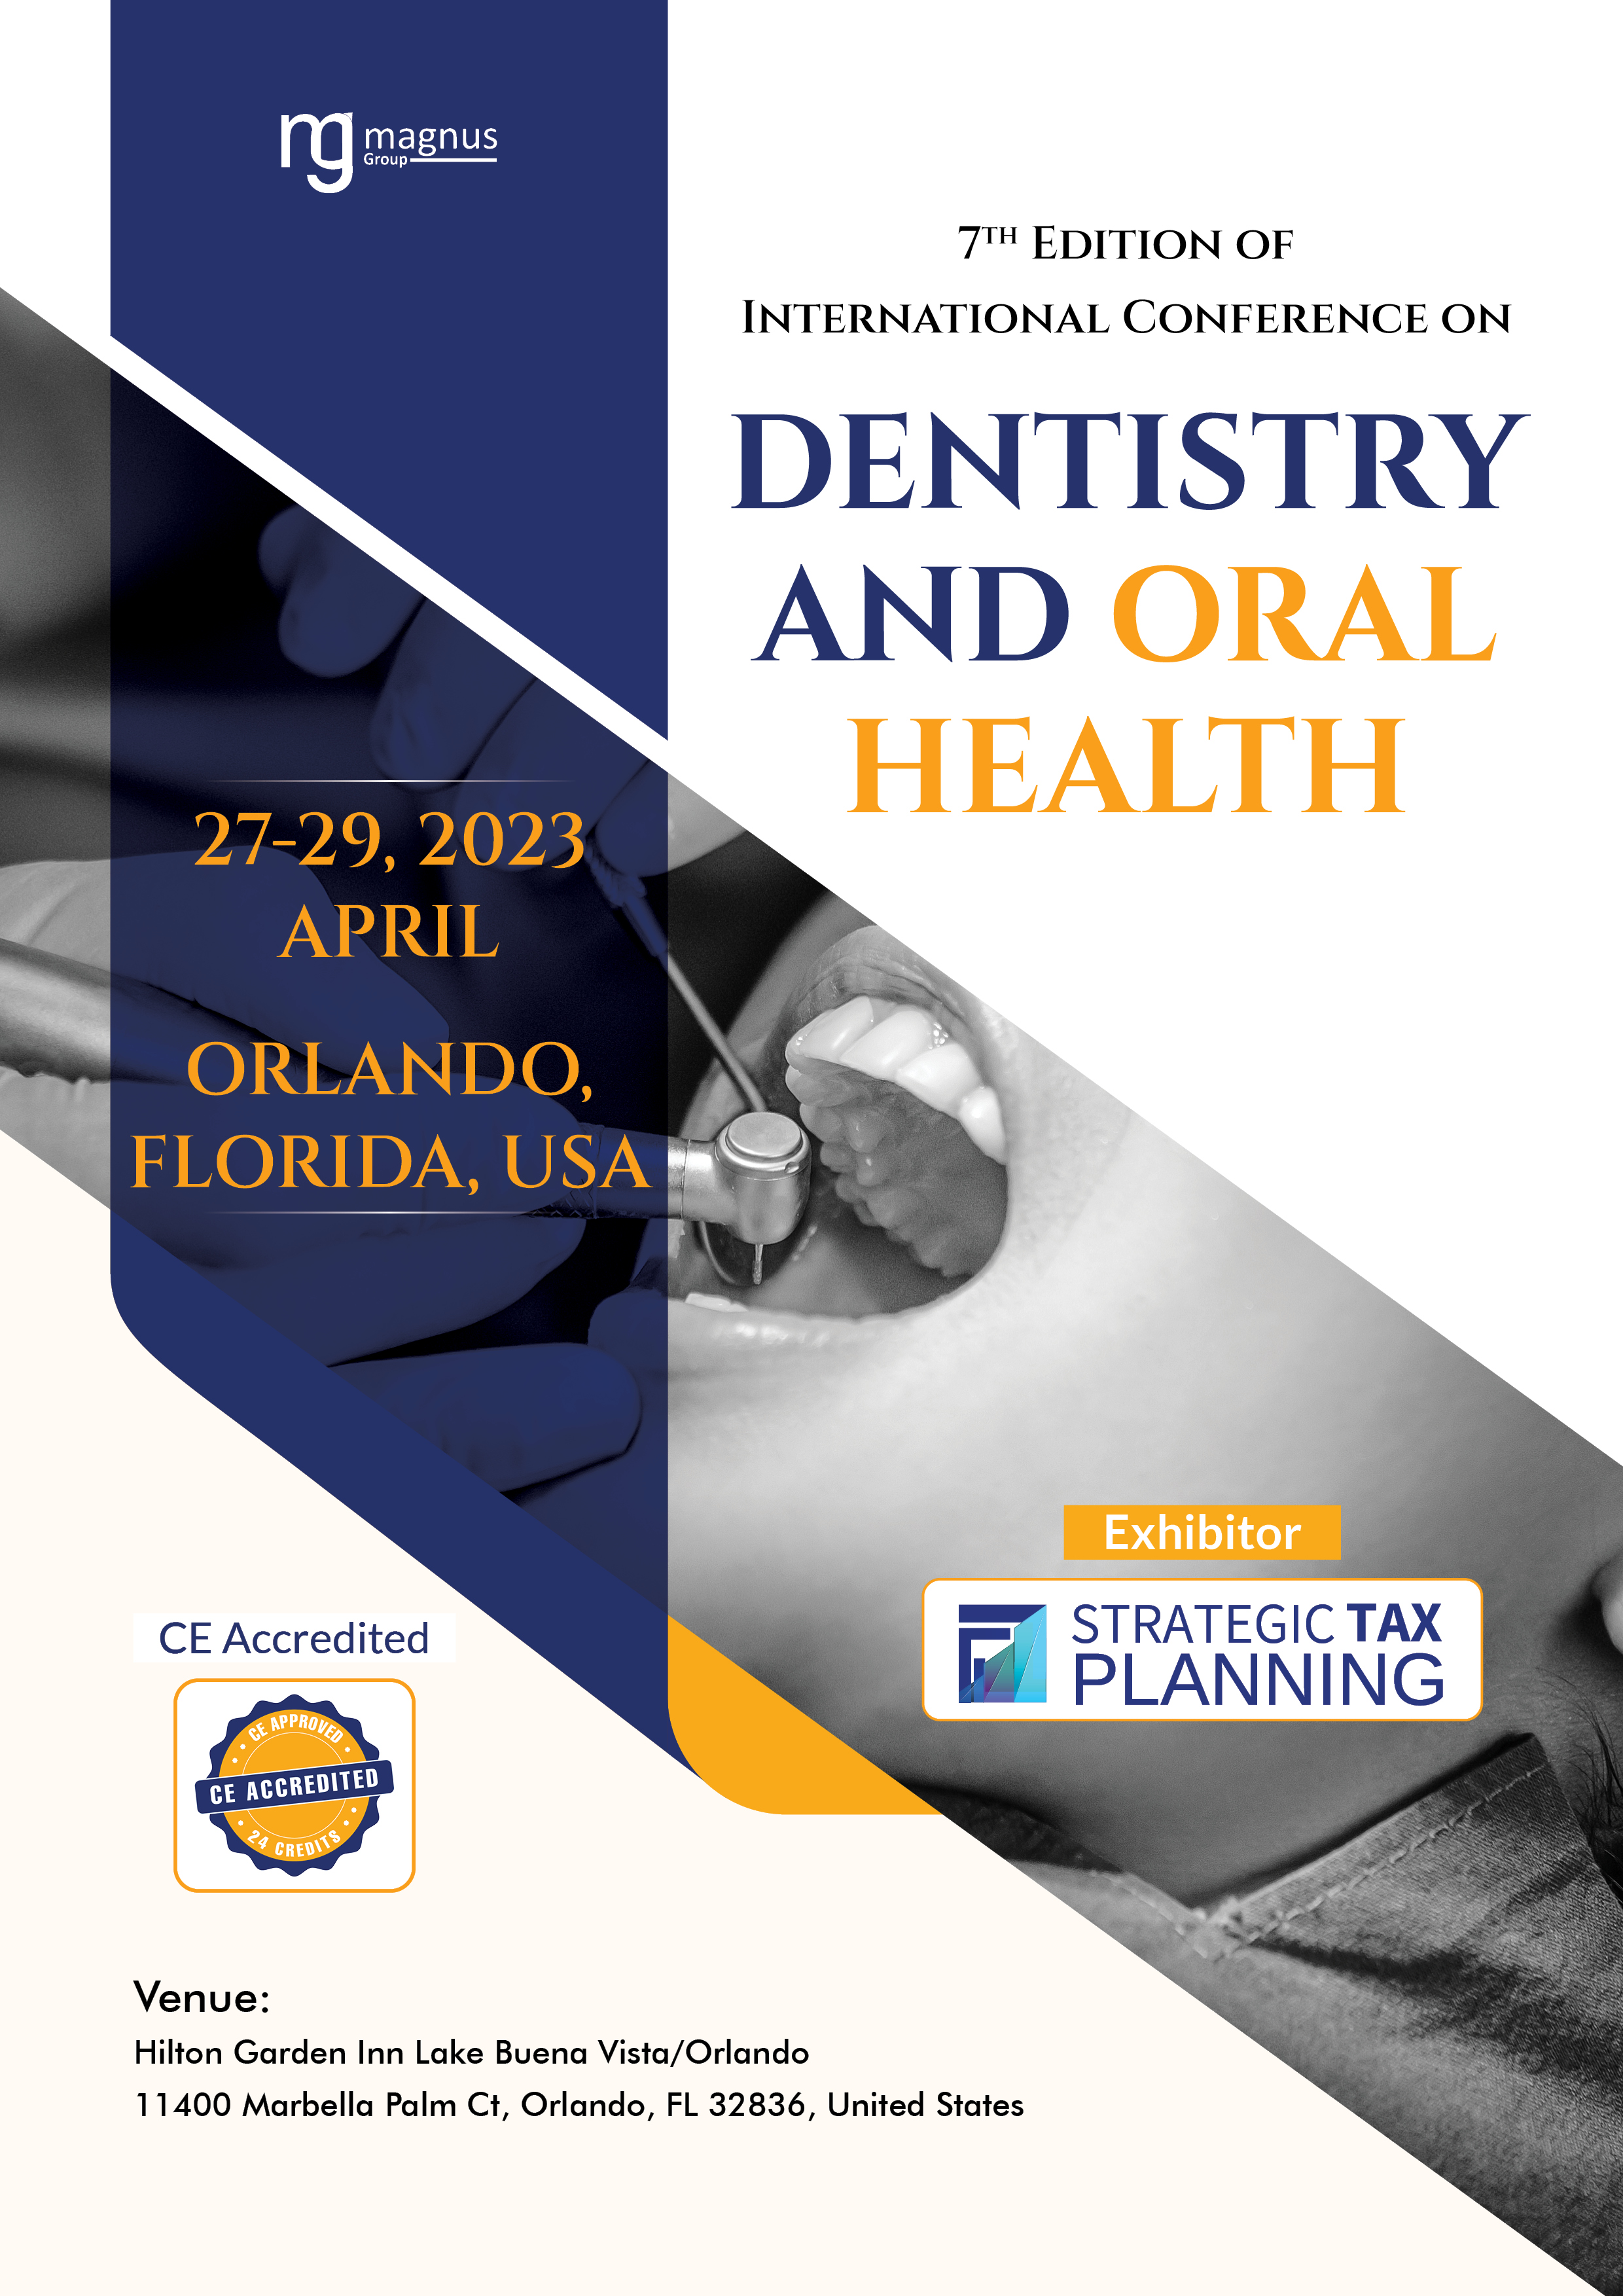 7th Edition of International Conference on Dentistry and Oral Health | Orlando, USA Book